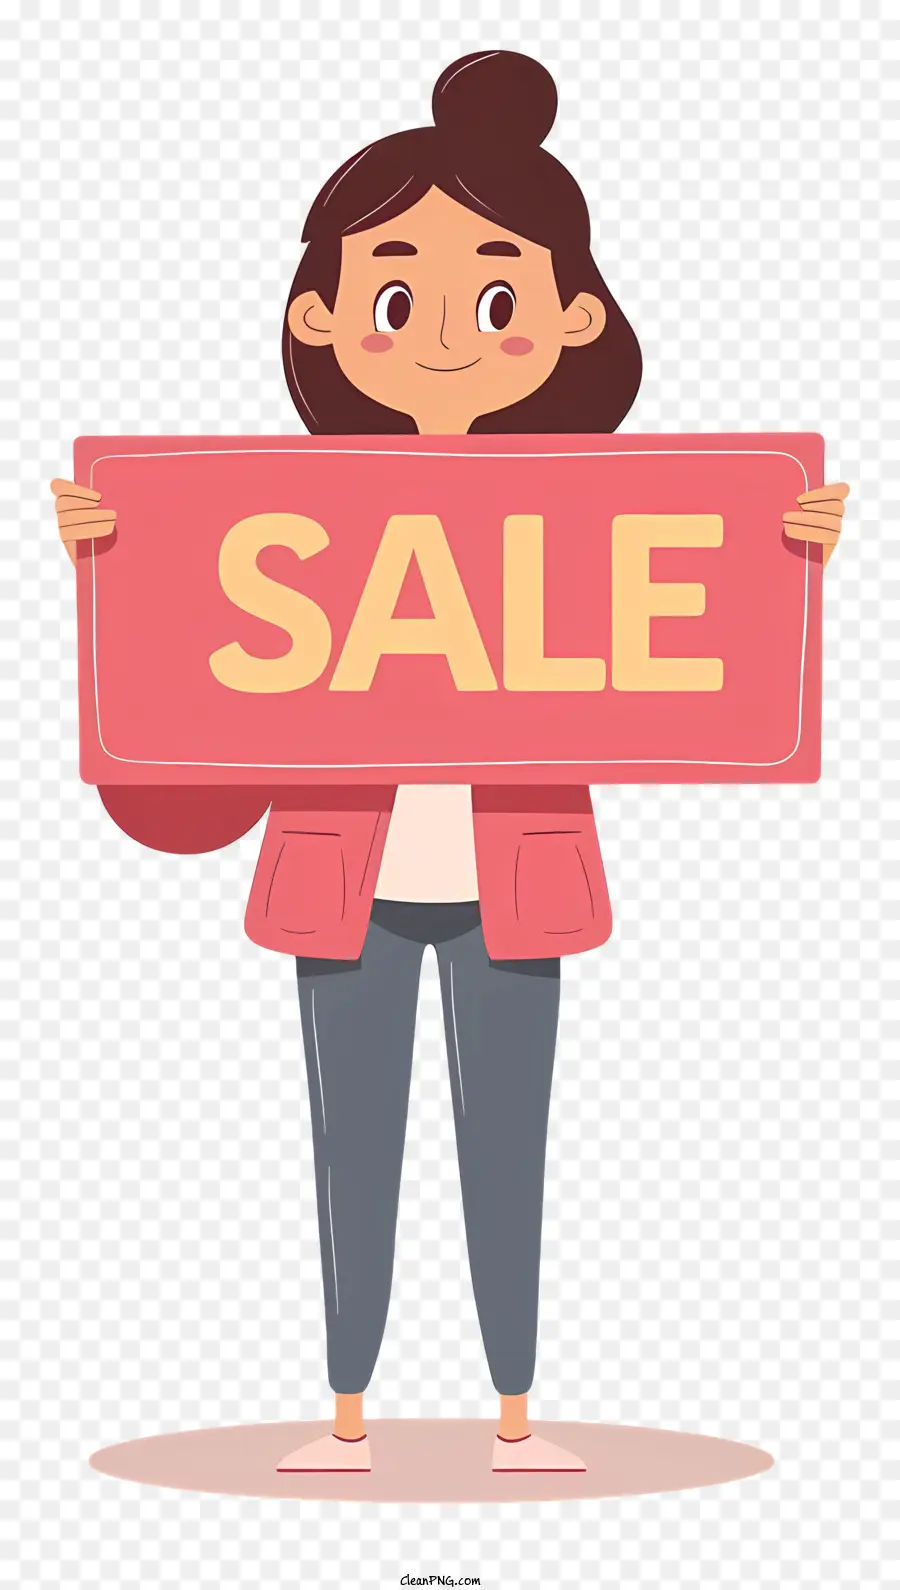 woman holding sale sign cartoon woman sale pink